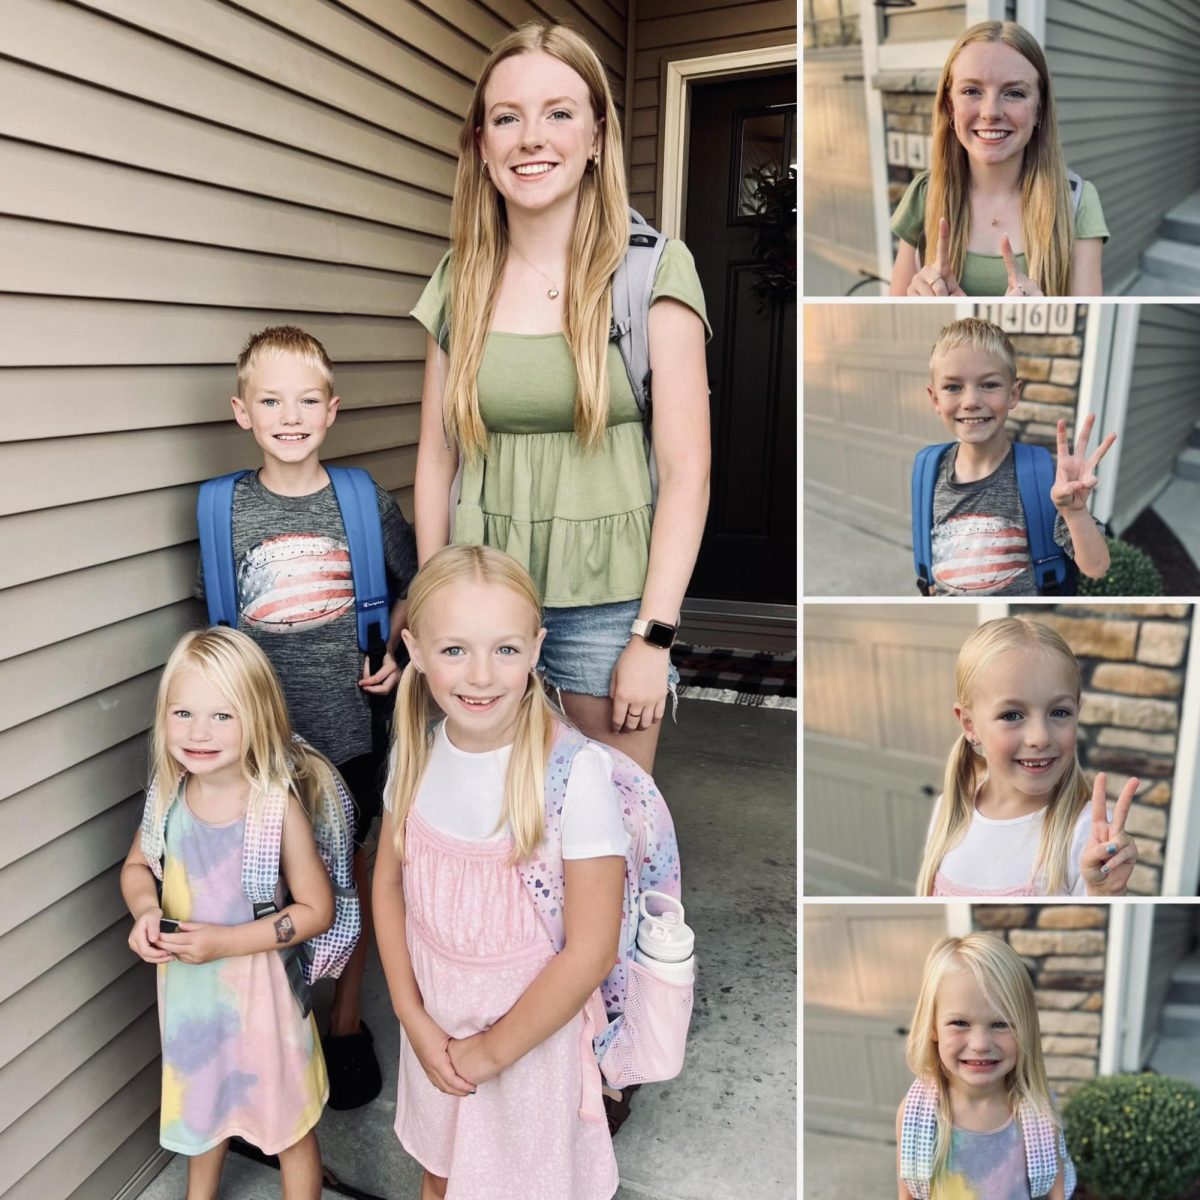 The Meiners family pictured together for their first day of school photos. Pictured from top to bottom on the right are Morgan, Carver, Sidney and Lainey.